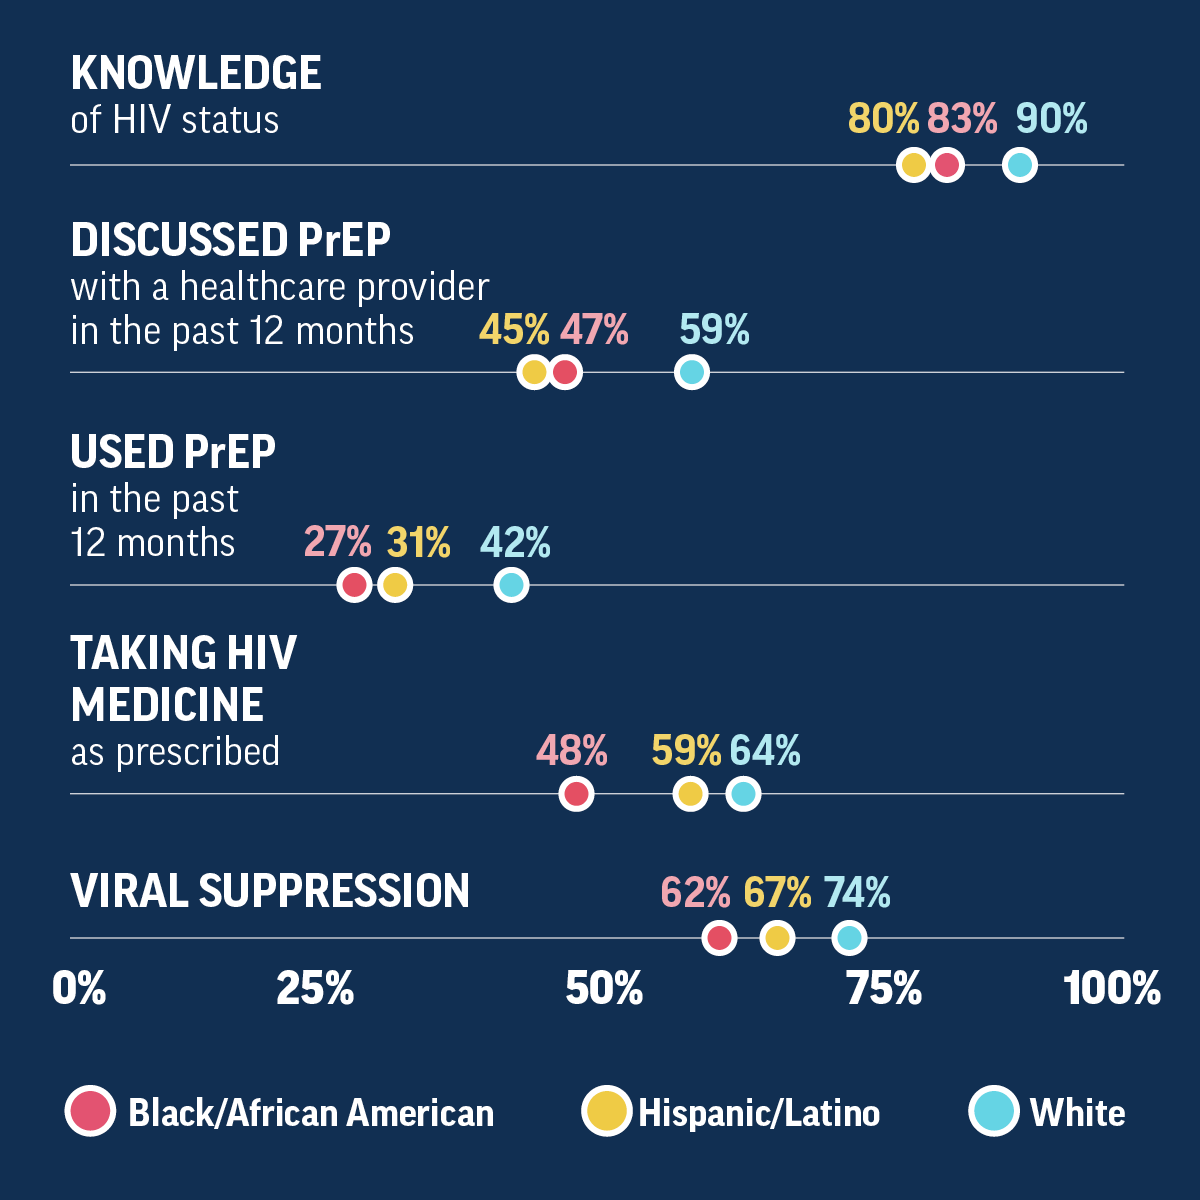 Table showing inequities by race/ethnicity among gay/bisexual men in HIV prevention and treatment outcomes.